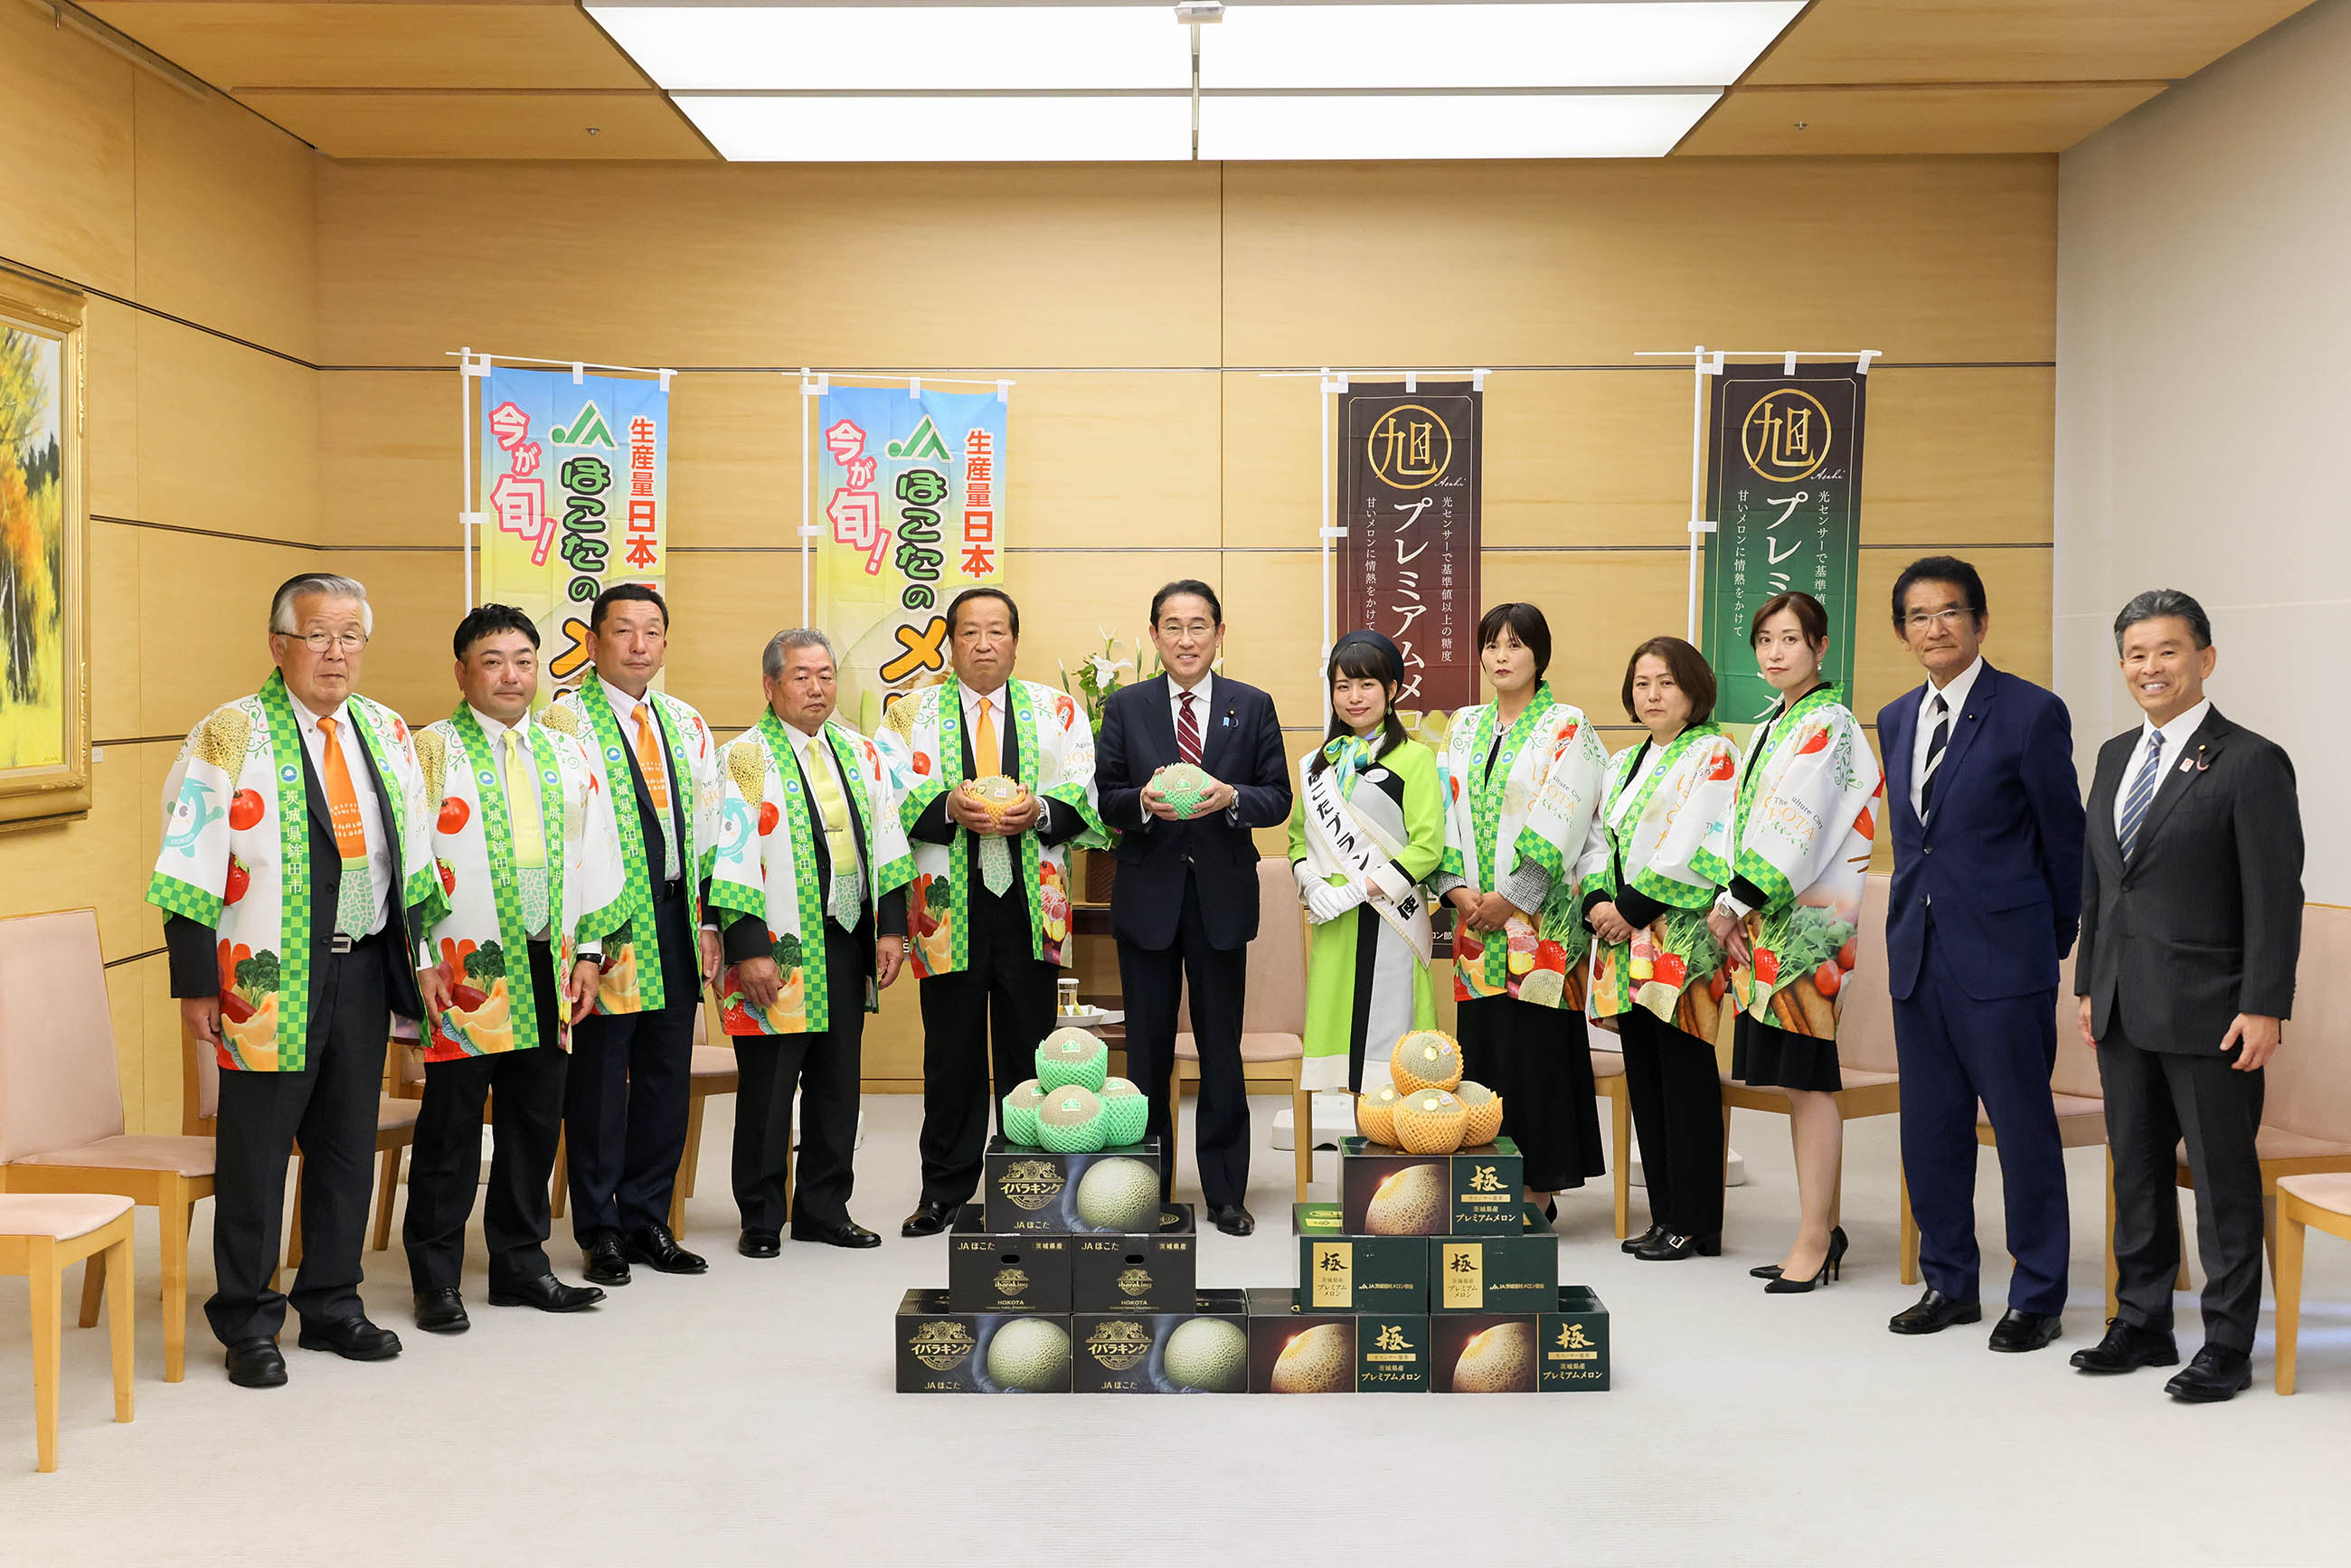 Presentation of Melons by a Delegation from the City of Hokota 